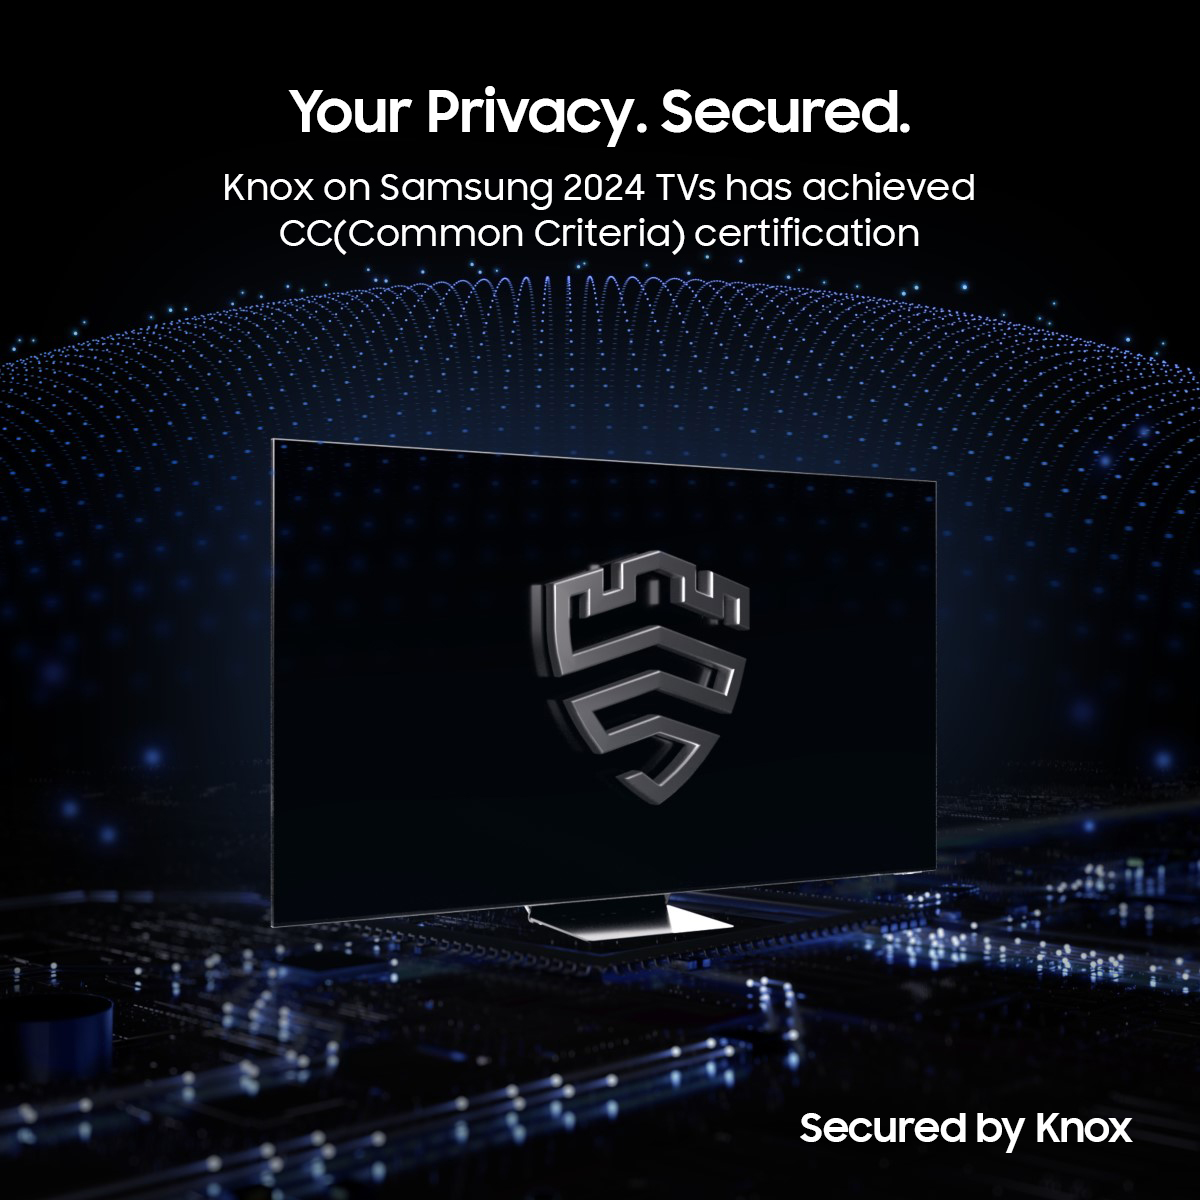 Samsung #SmartTVs are built with security in mind, actively protecting against potential hacking threats. ✔ Smart home security ✔ Multi-layered security ✔ Phishing website blocking ✔ Regular updates Learn all about it, here spr.ly/6014bFvGm #Privacy #SamsungKnox